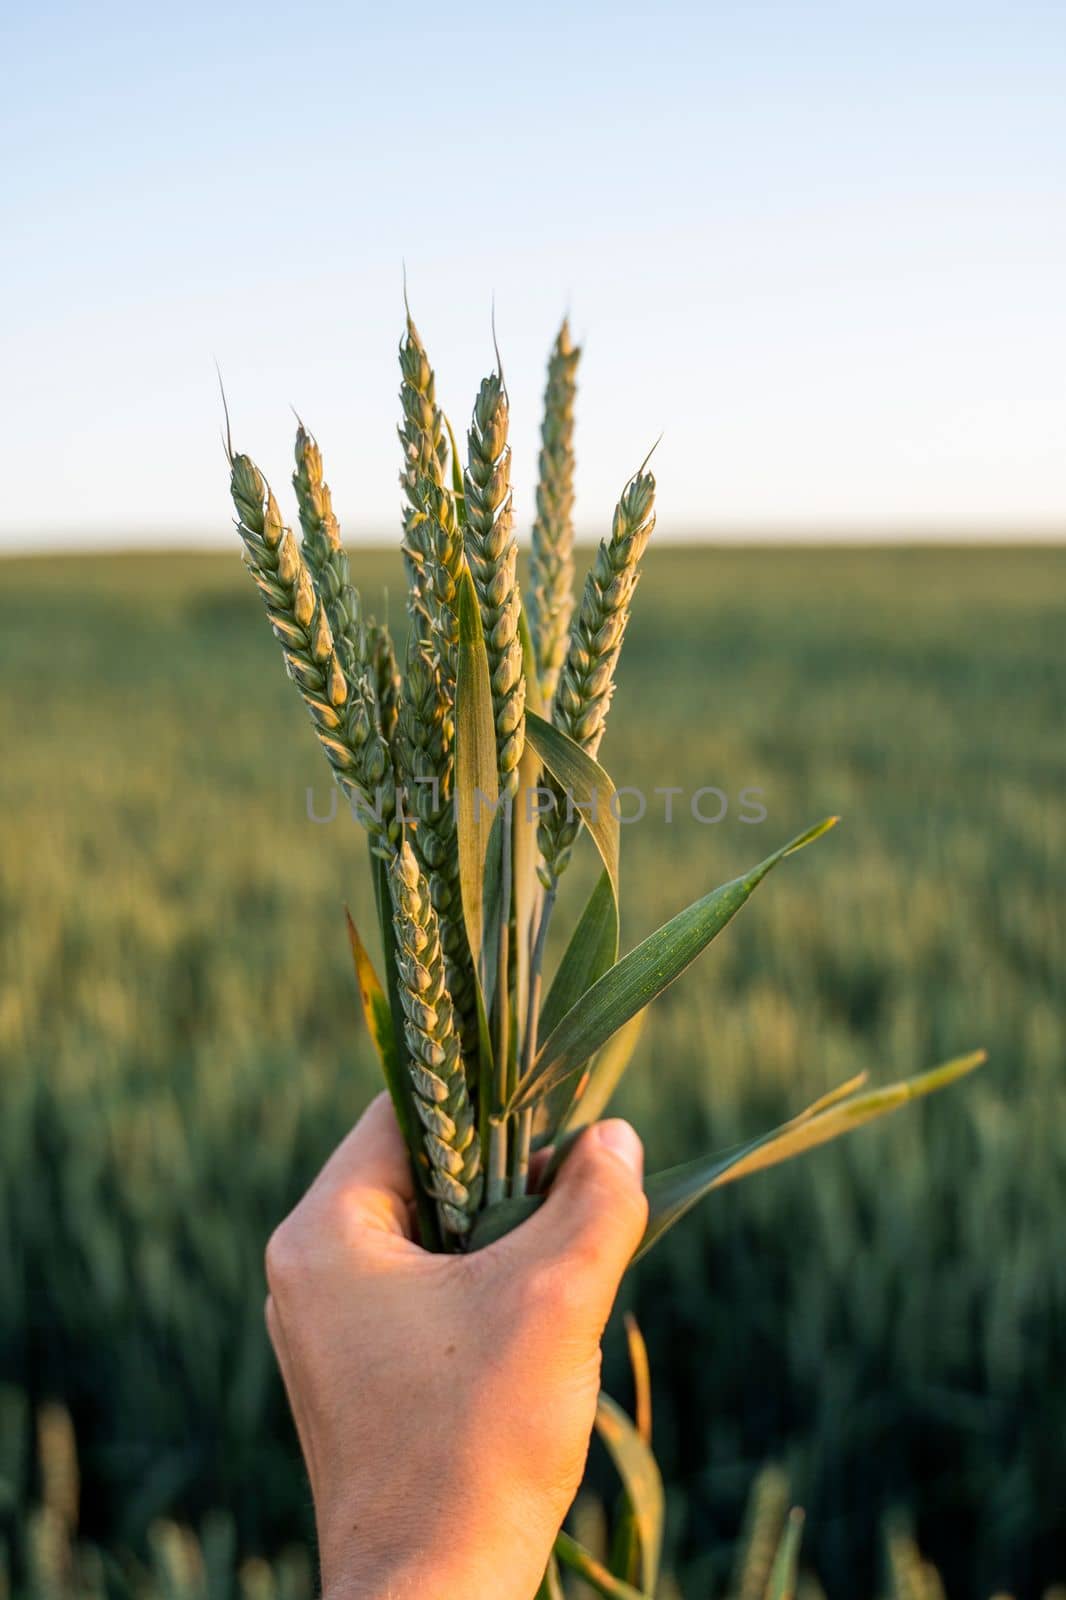 Young wheat spikes in farmers hand with a agricultural field on background, rural landscape. Green unripe cereals. The concept of agriculture, healthy eating, organic food. by vovsht